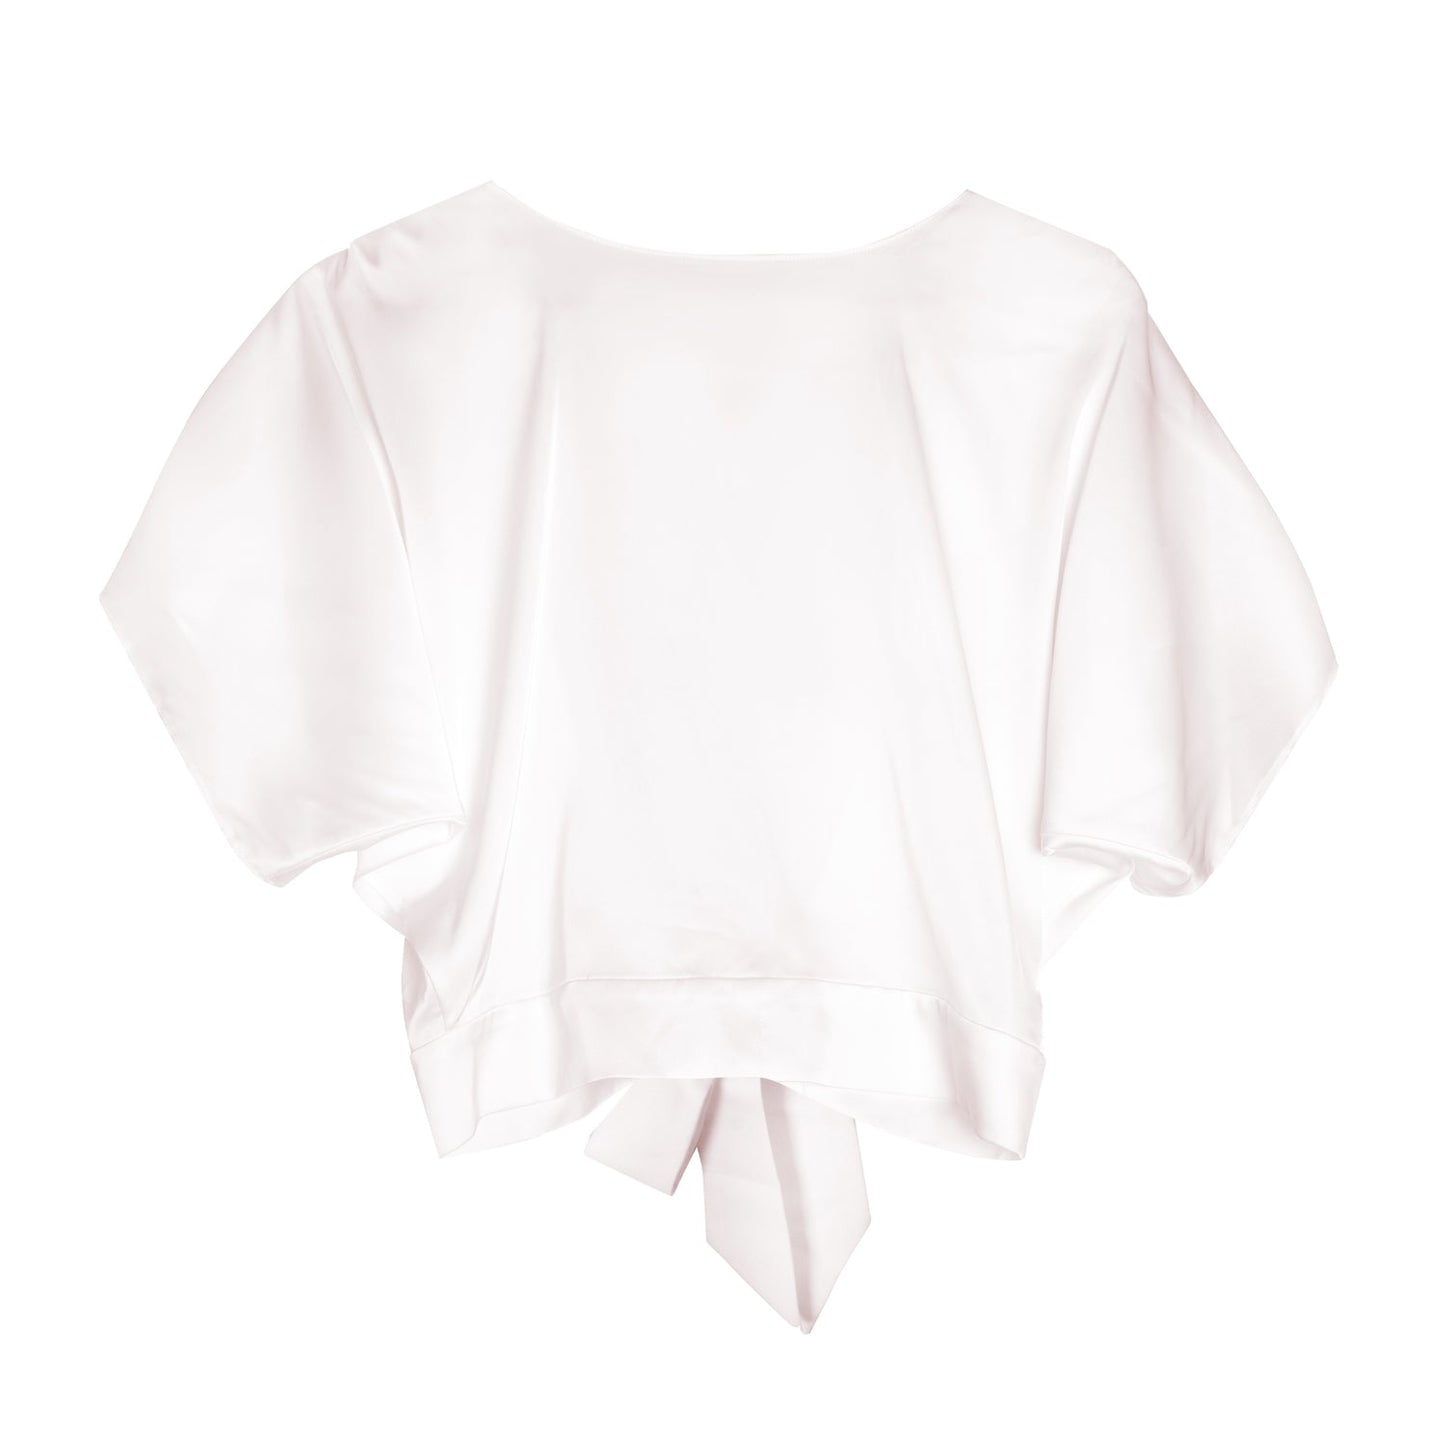 The Lala Top in White